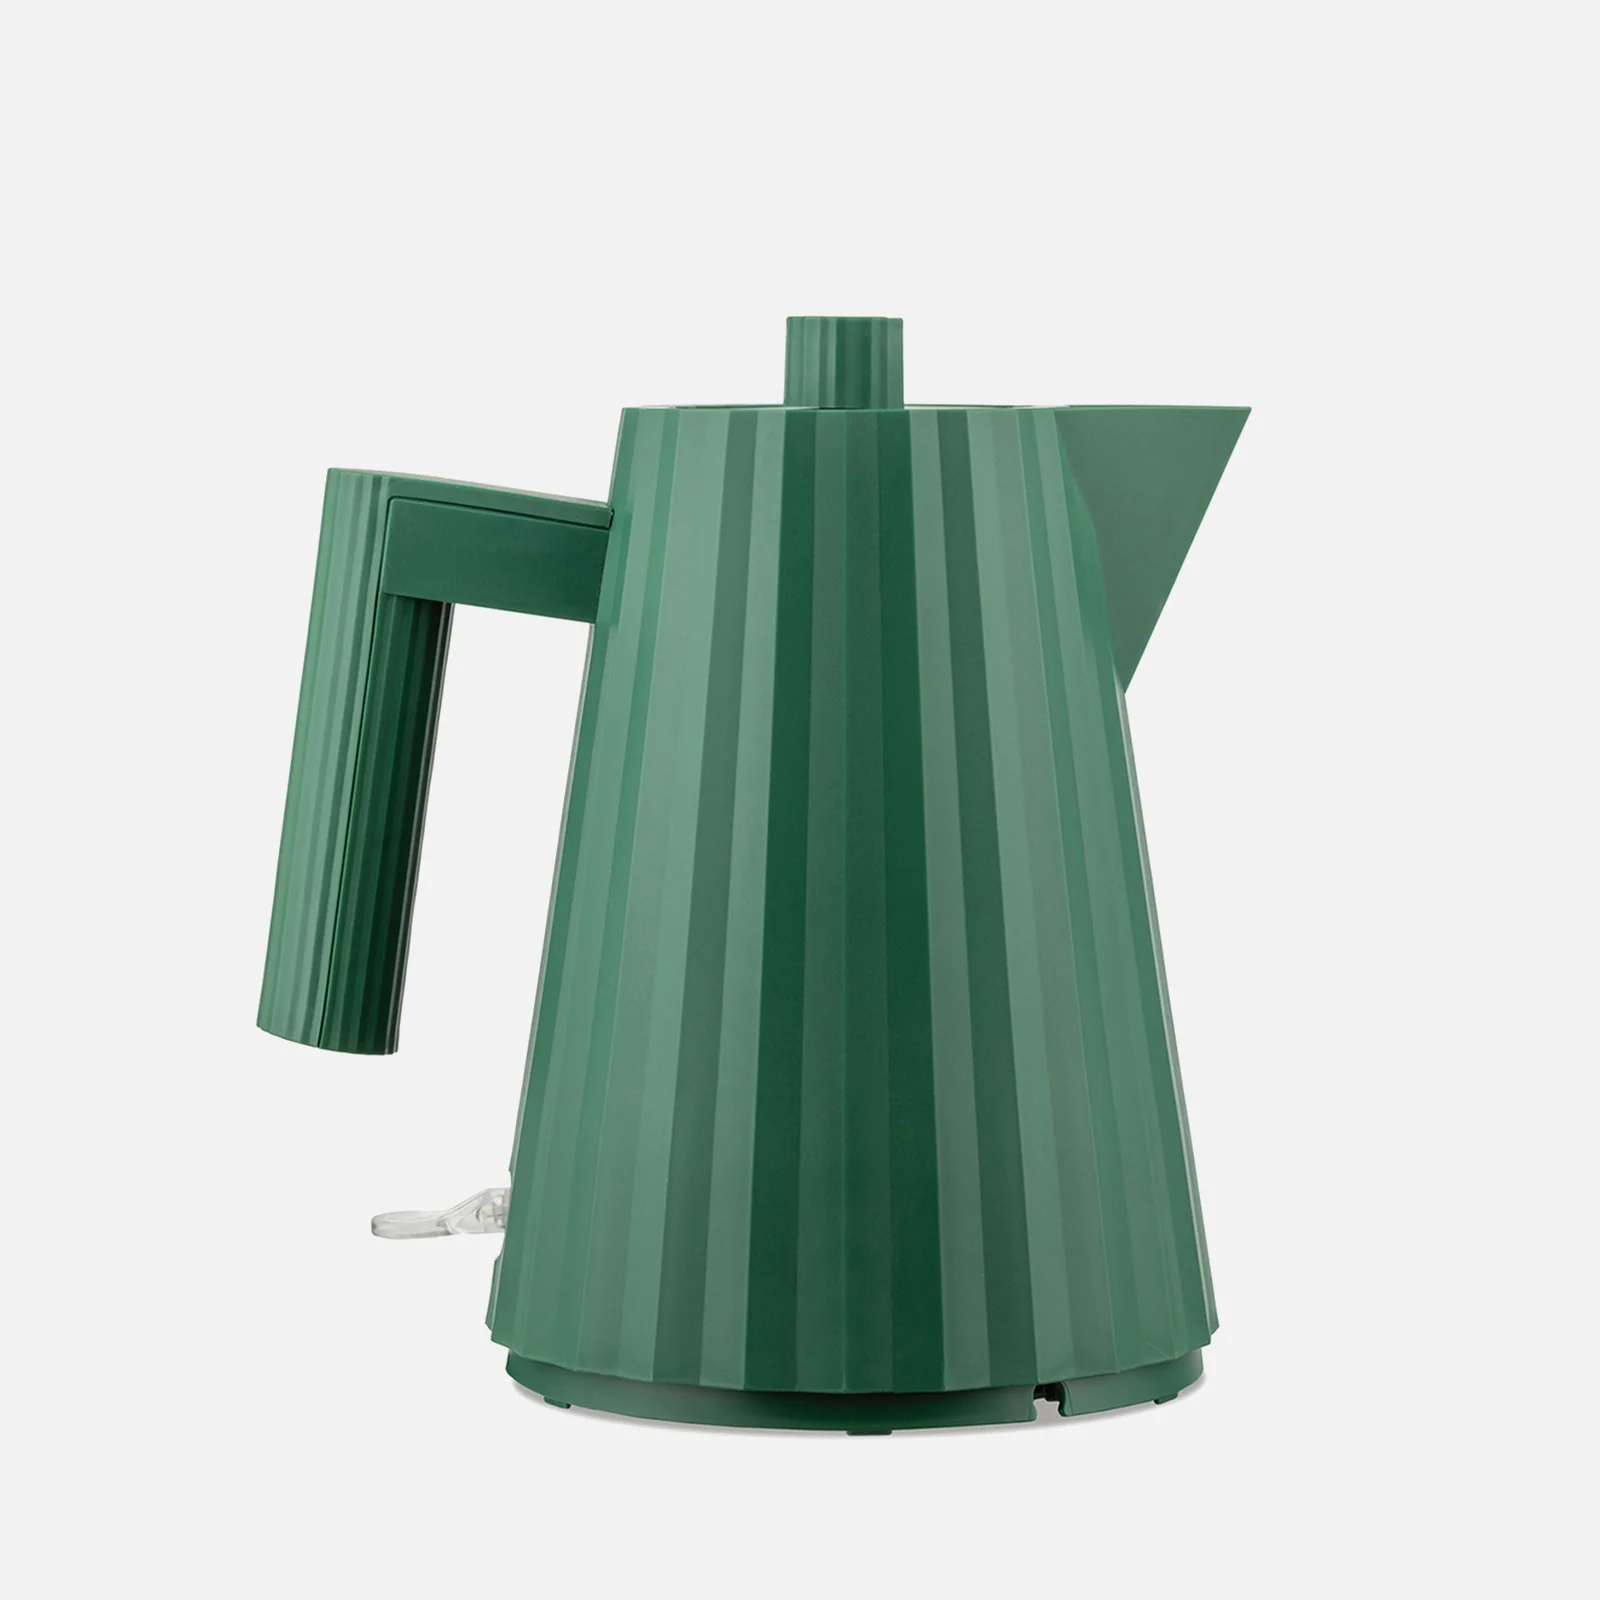 Alessi Electric Kettle - Plisse Green - 1.7L Image 1